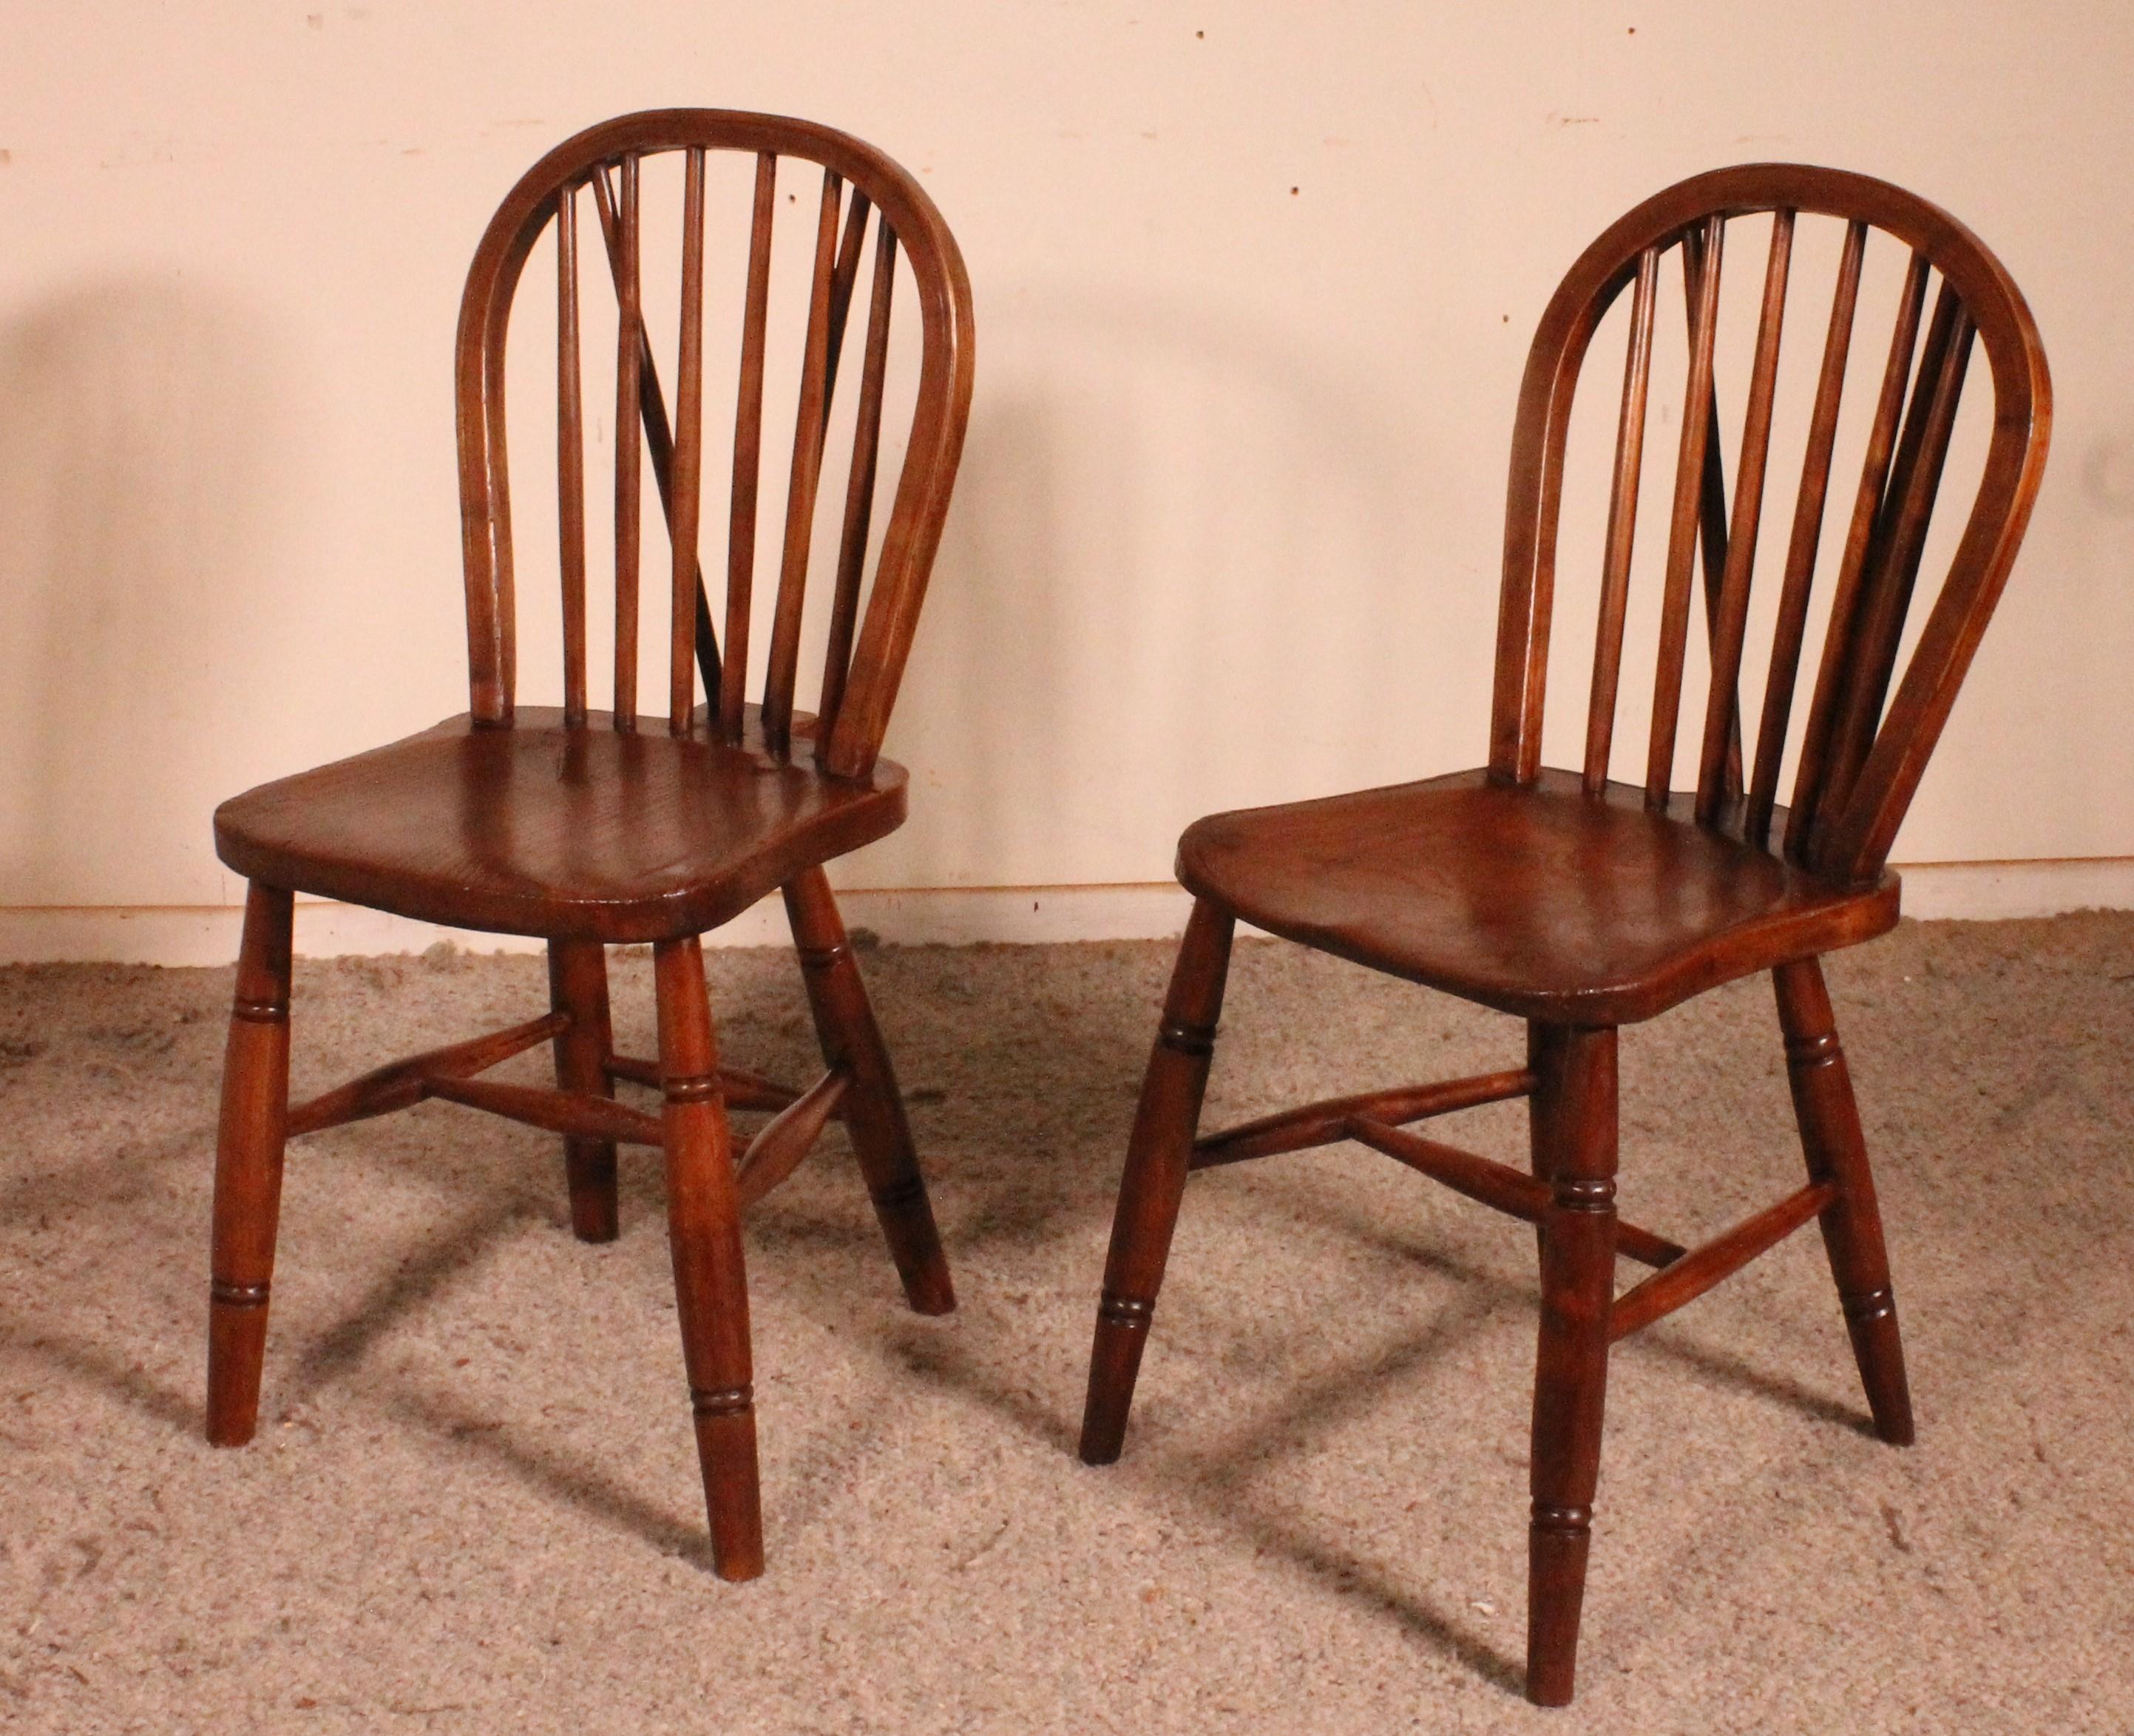 Set of 8 Windsor Chairs 19th Century-England 1